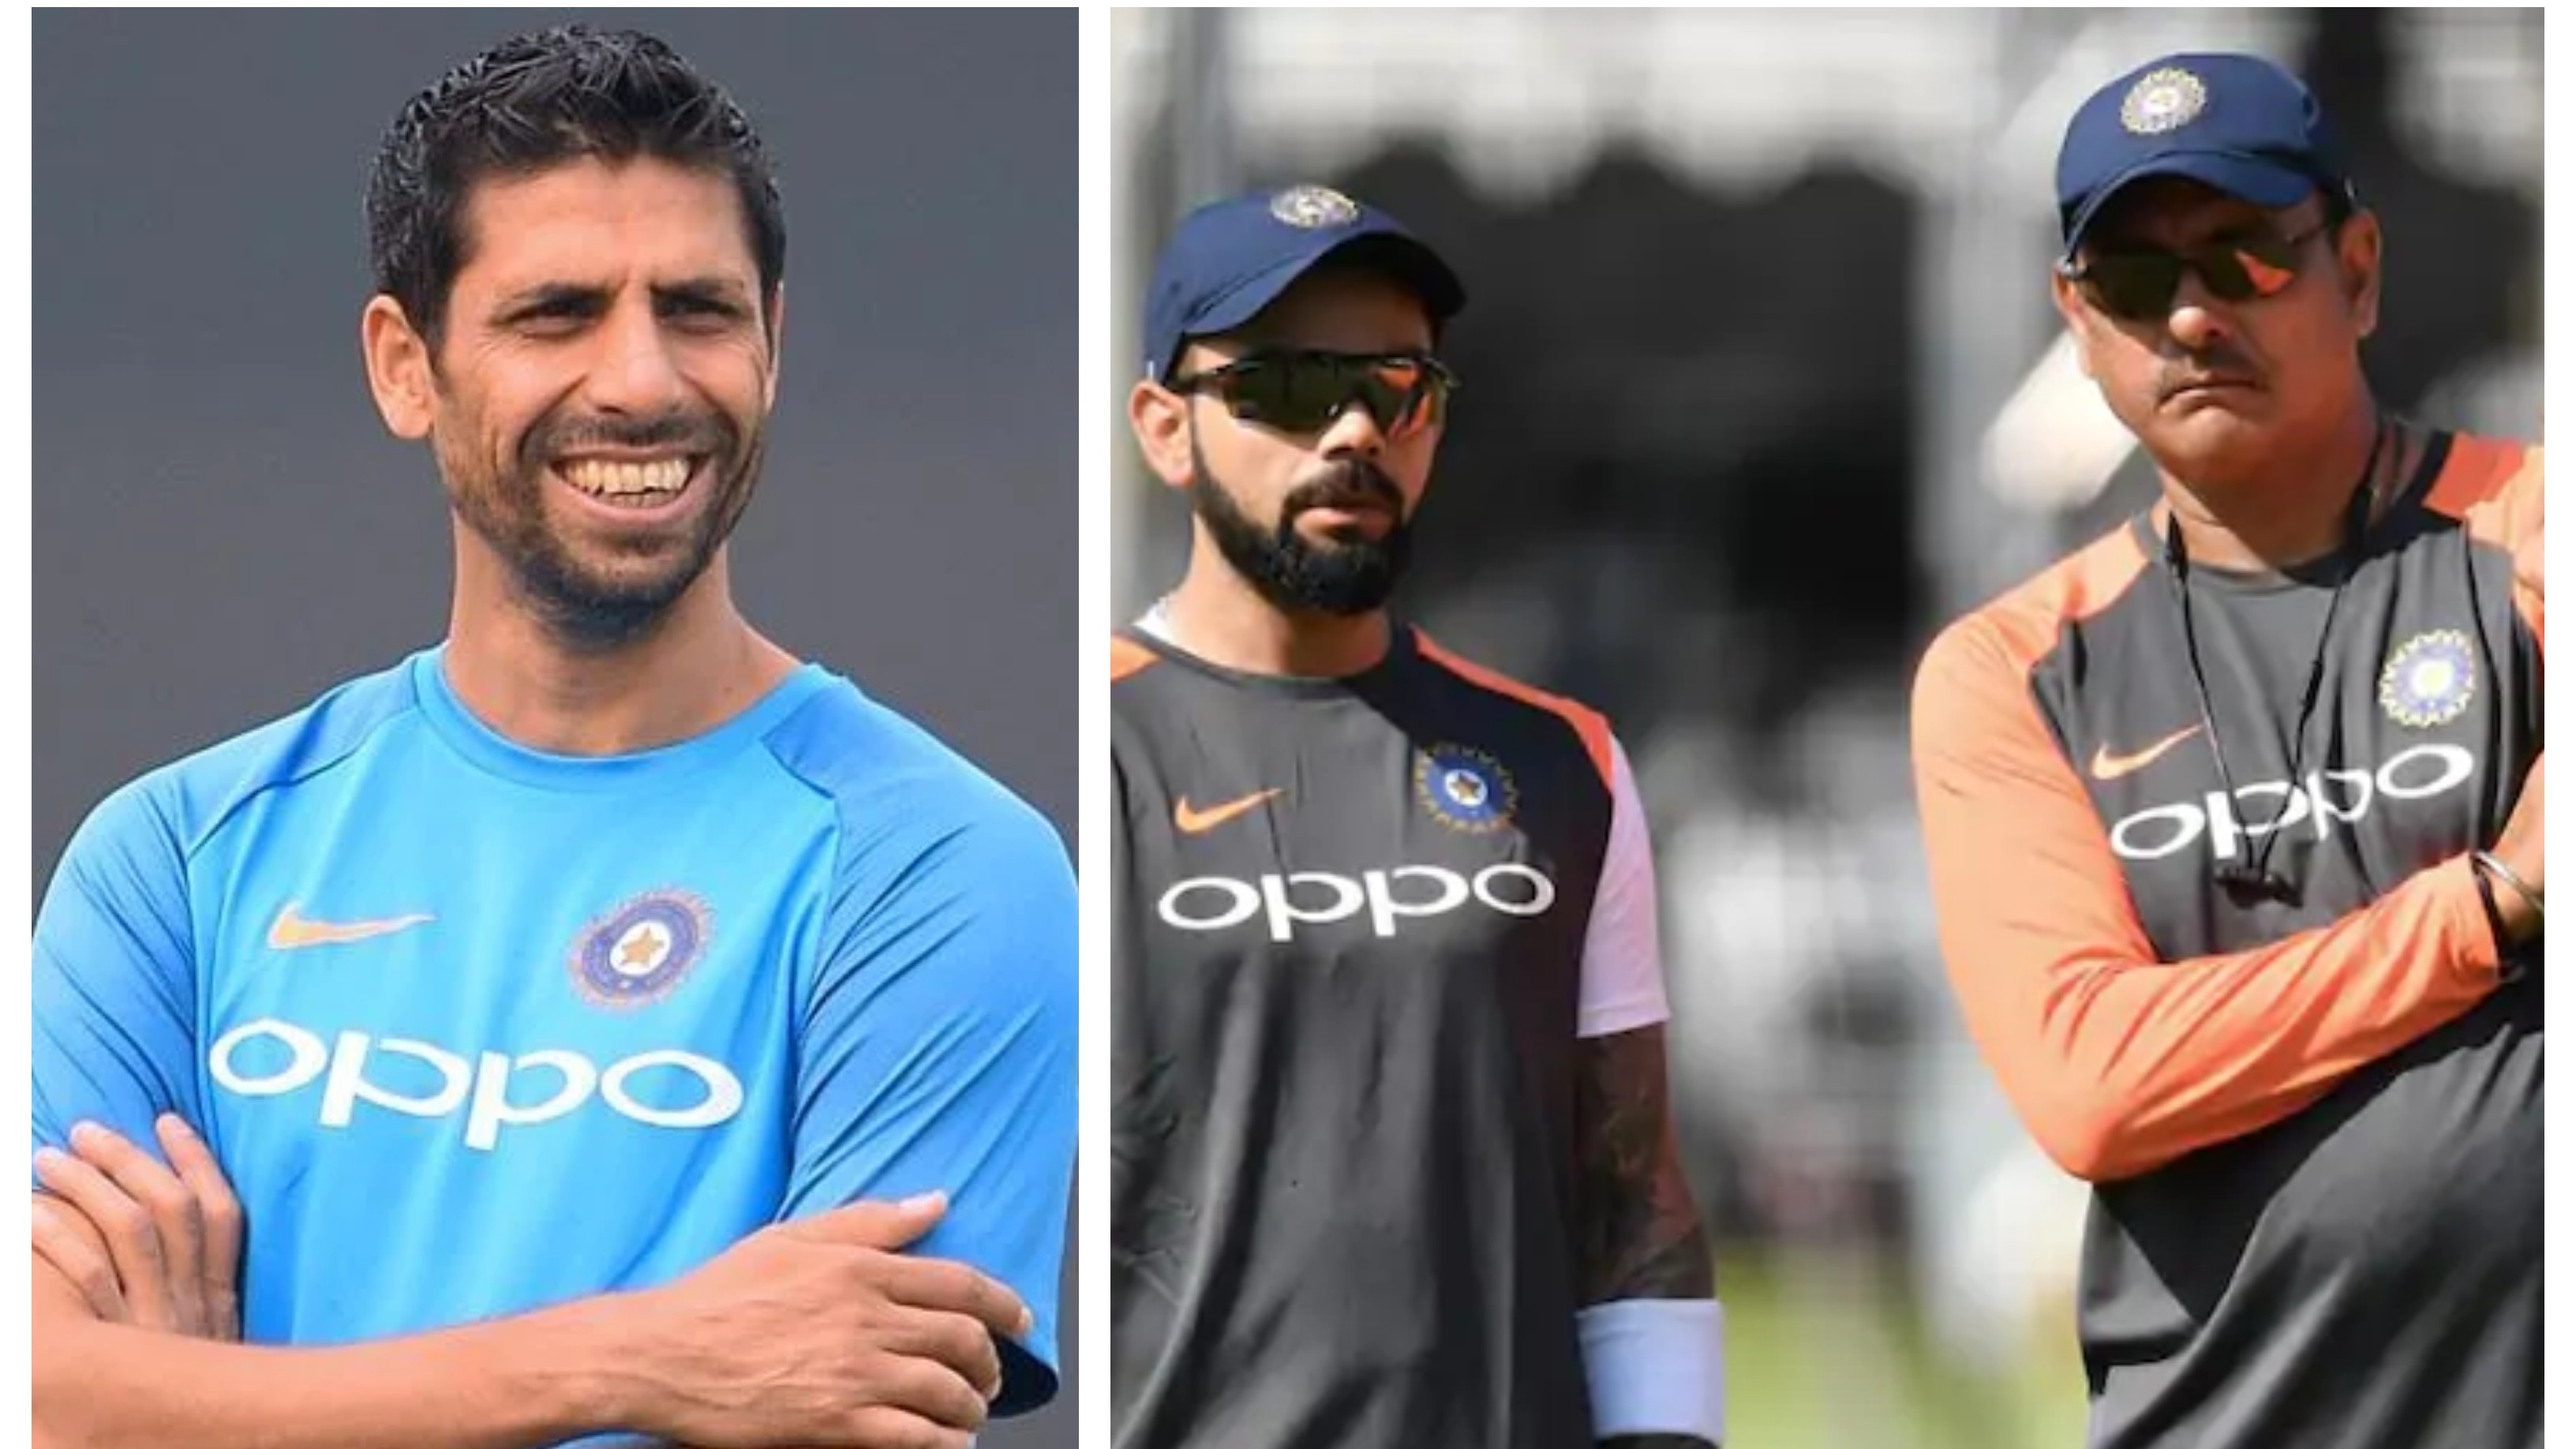 Shastri’s appointment as coach helped Kohli after controversial ending of Kumble's tenure: Nehra